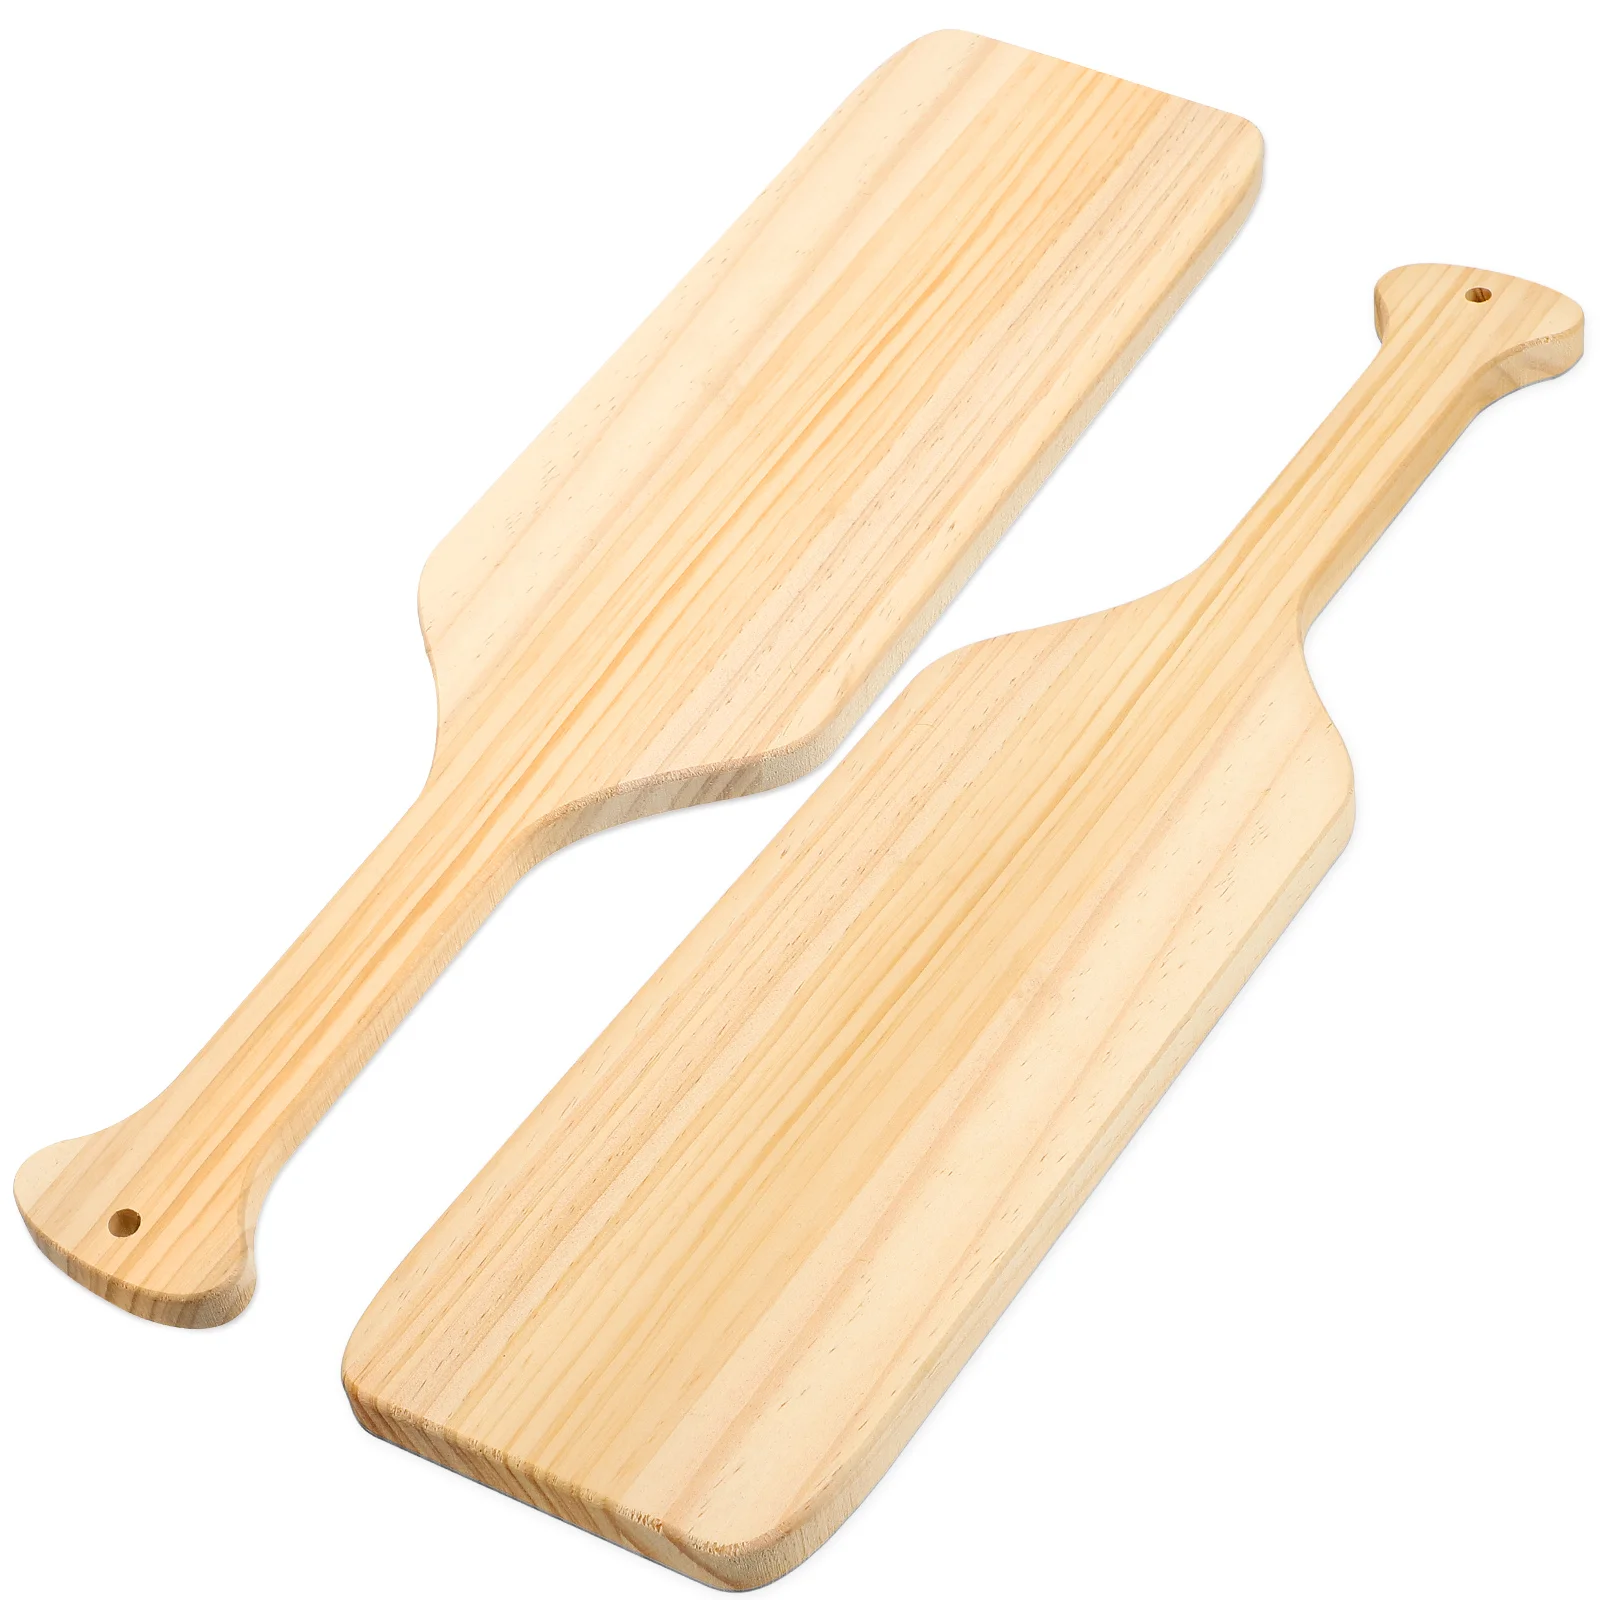 

2 Pcs Unfinished Wooden Paddles Greek Fraternity Paddles Solid Pine Sorority Paddles Wood Crafts for DIY Home Decoration